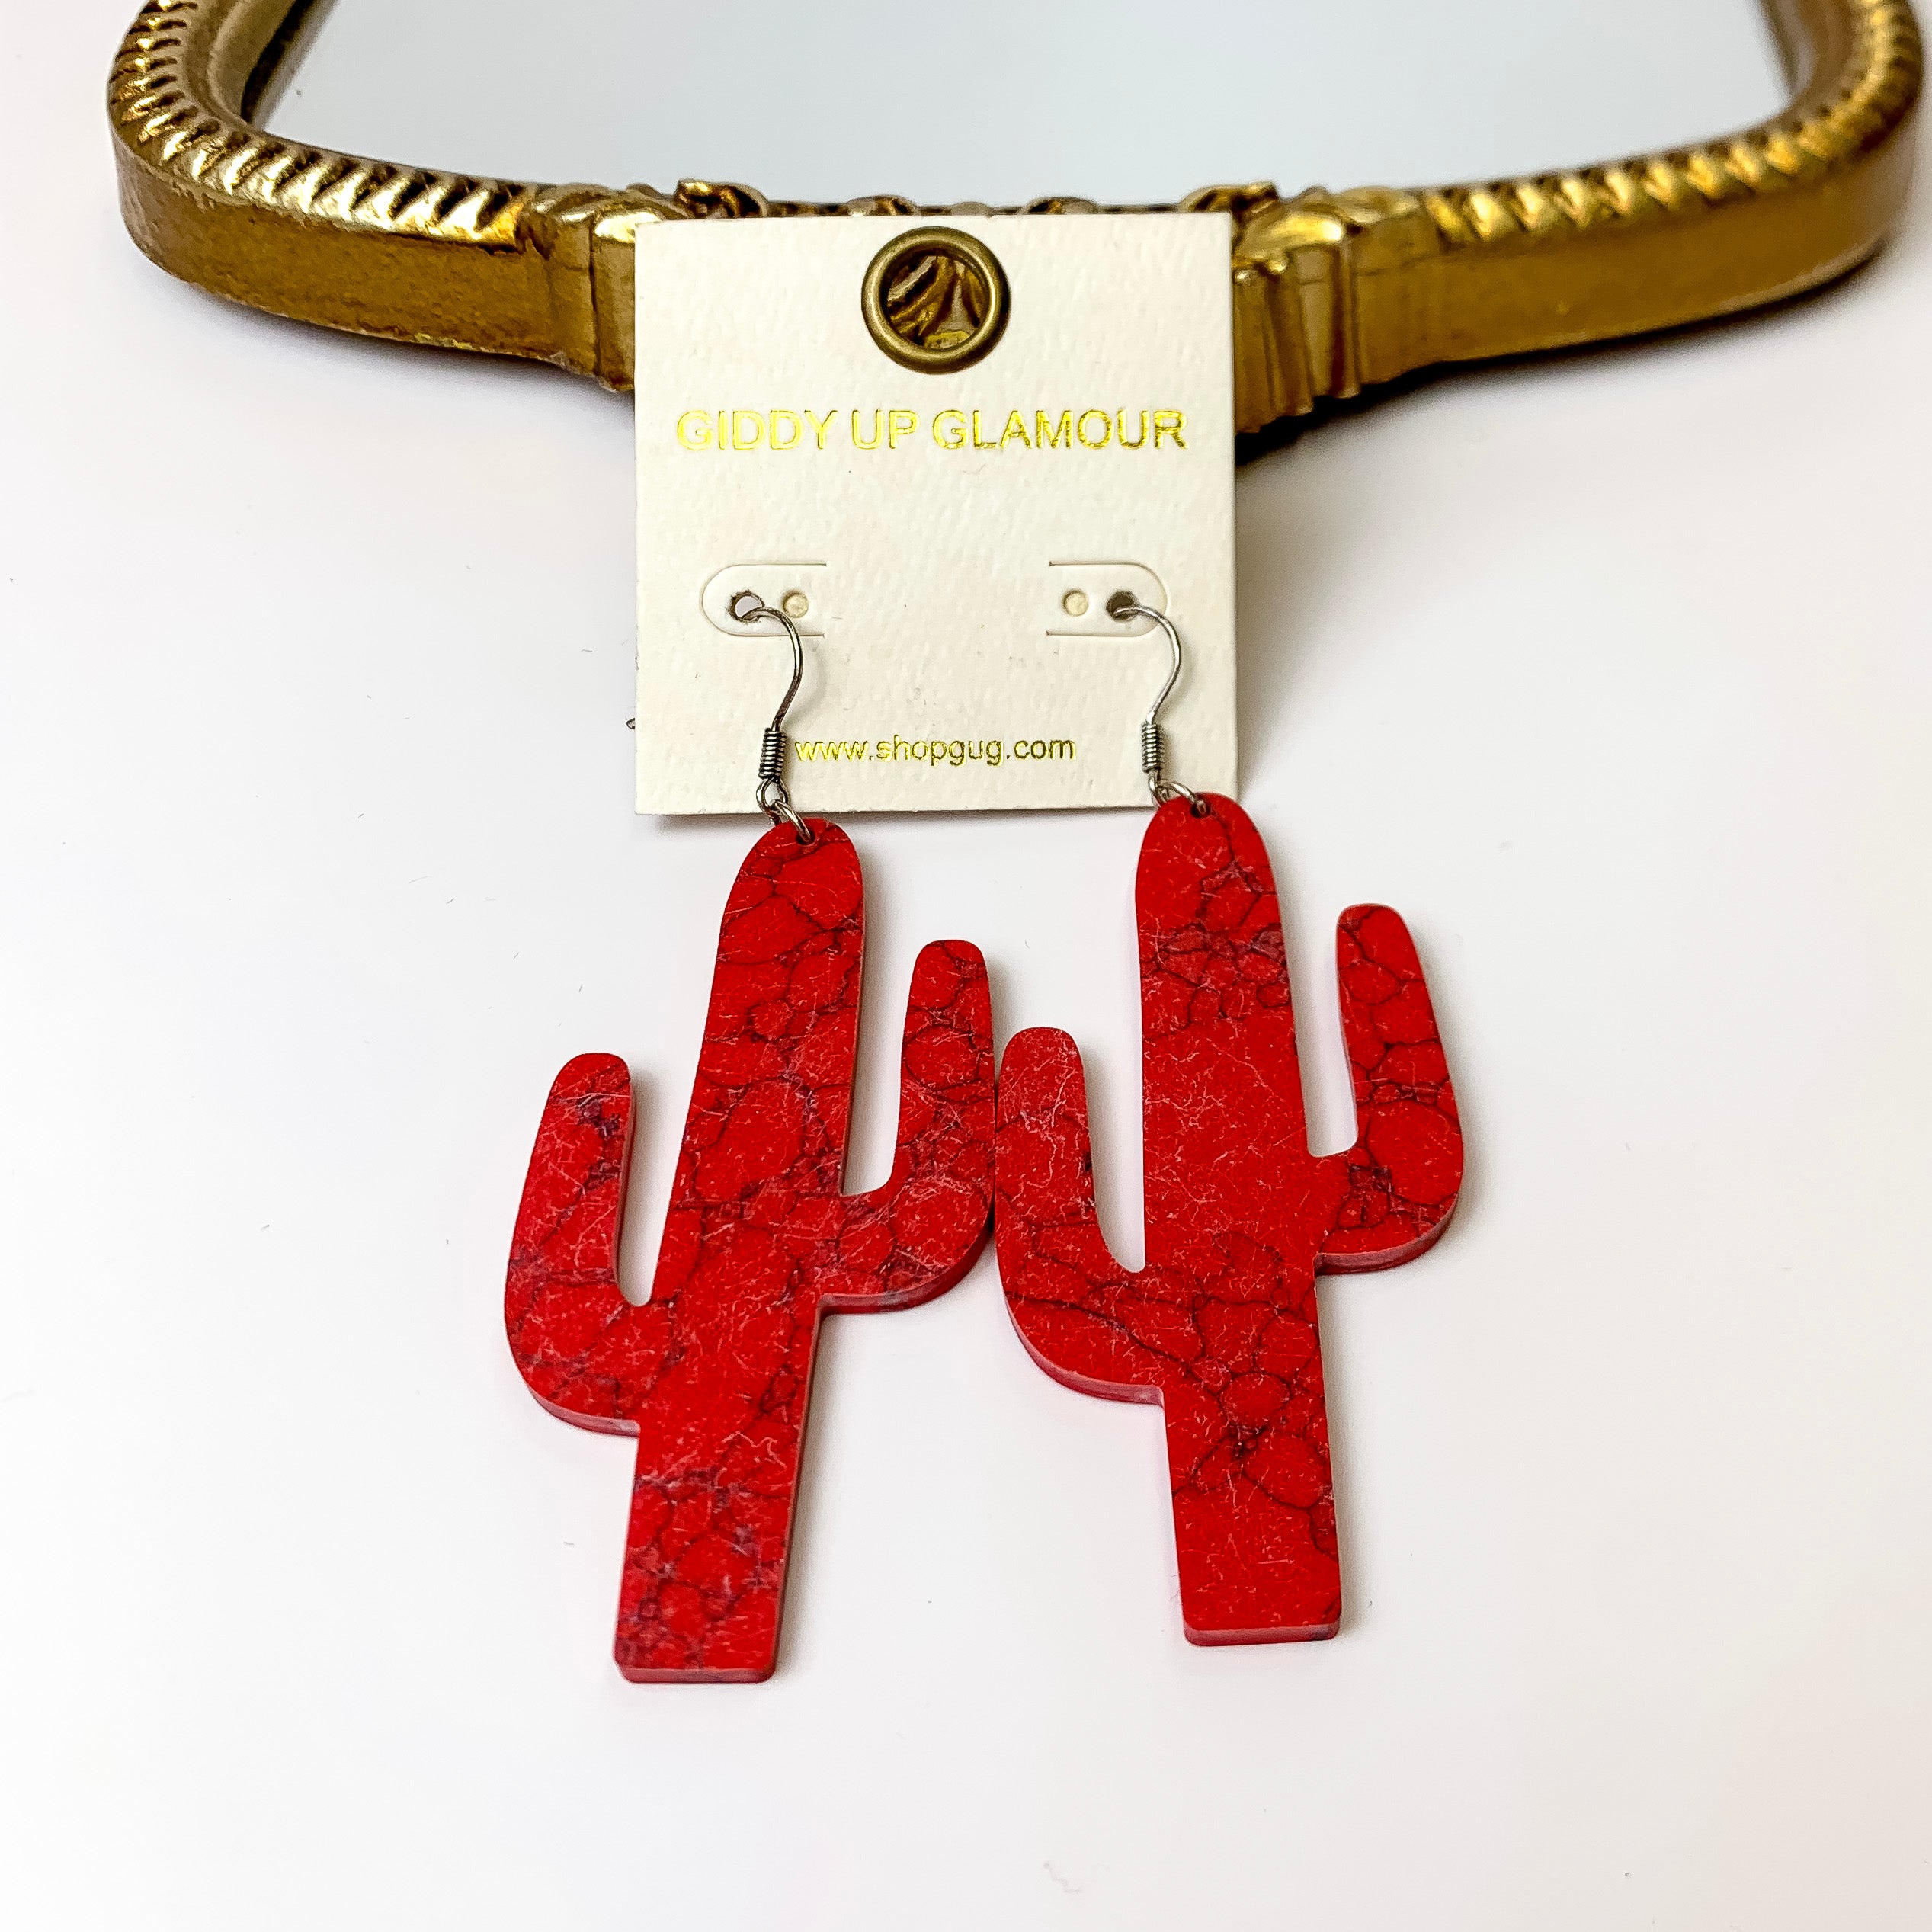 Set in Stone Cactus Cutout Earrings in Red - Giddy Up Glamour Boutique